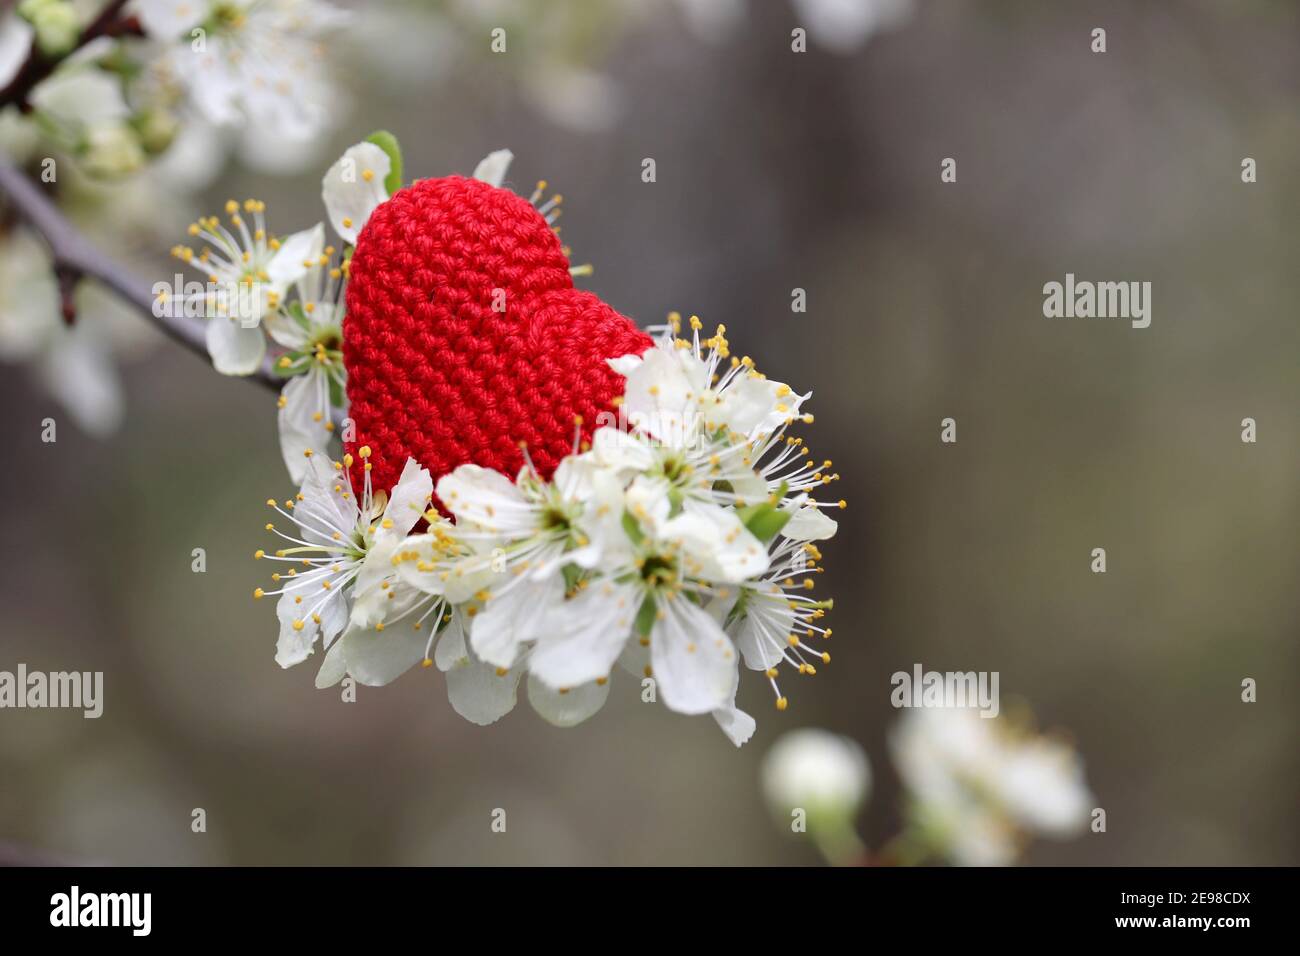 Valentines heart with cherry blossom, selective focus. White flowers and red knitted symbol of romantic love on a branch in a garden Stock Photo